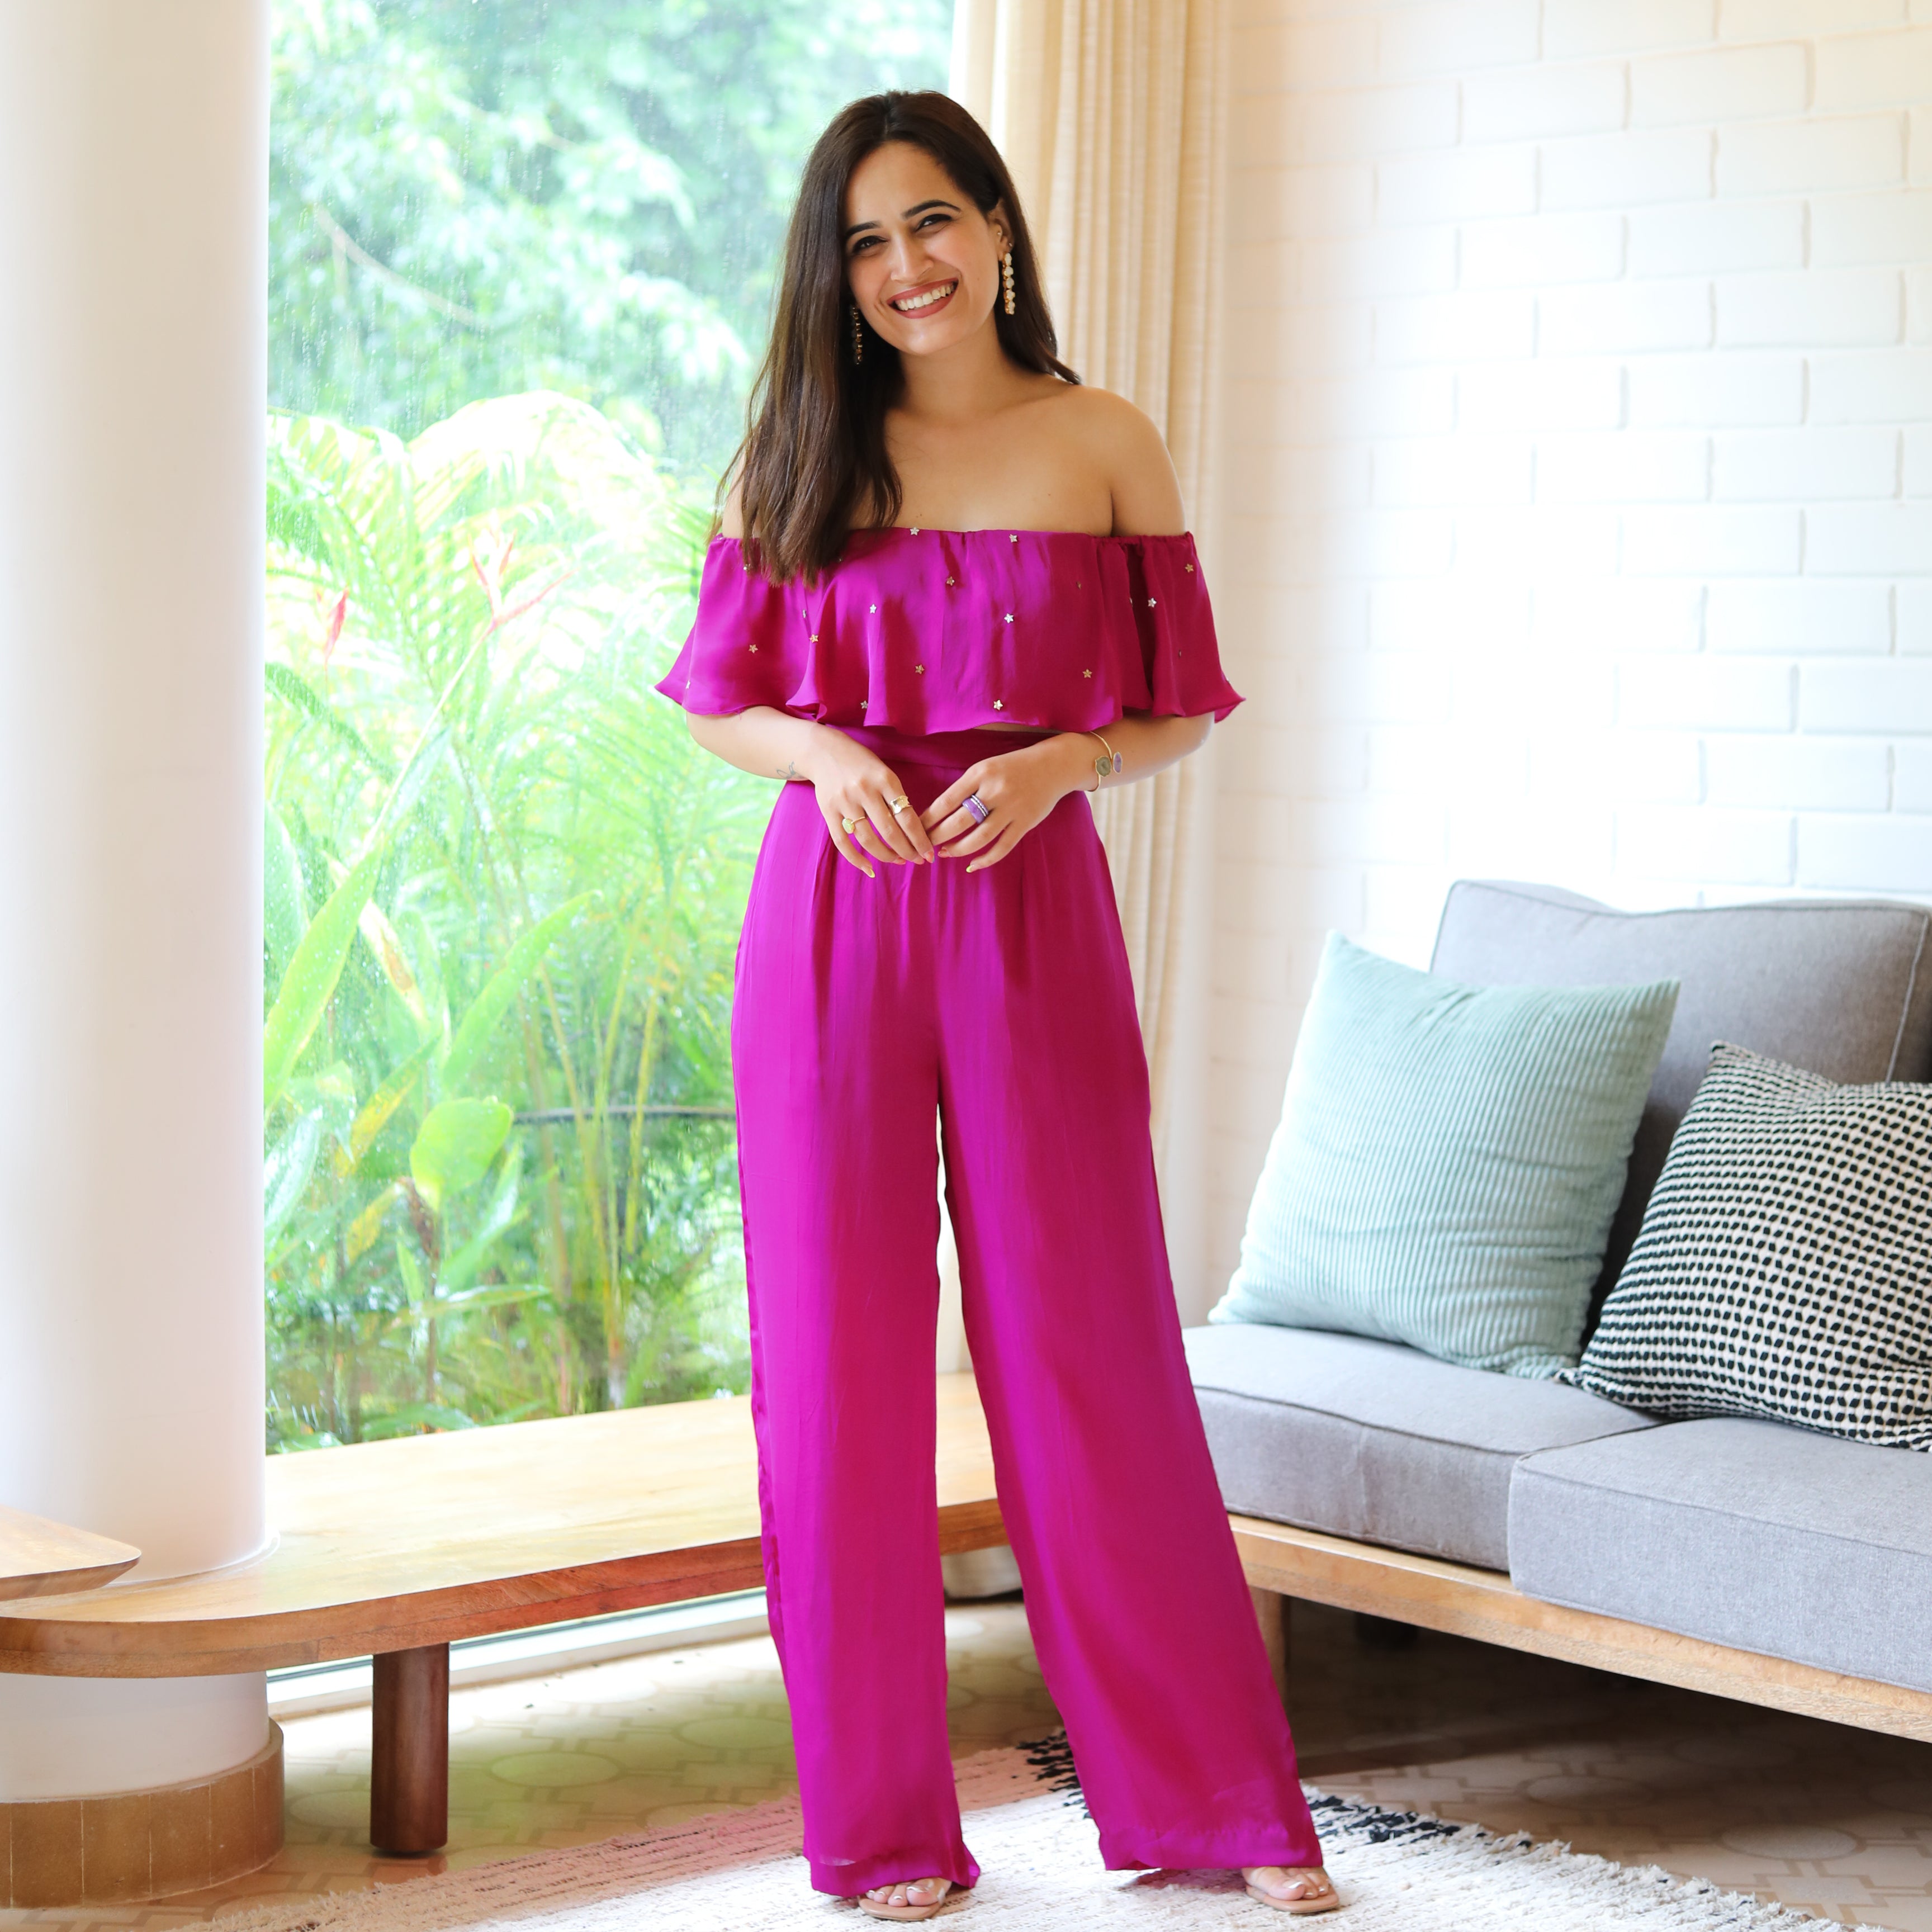 Shop for Trendy Co-ord Sets For Women Online At Upto 85% off